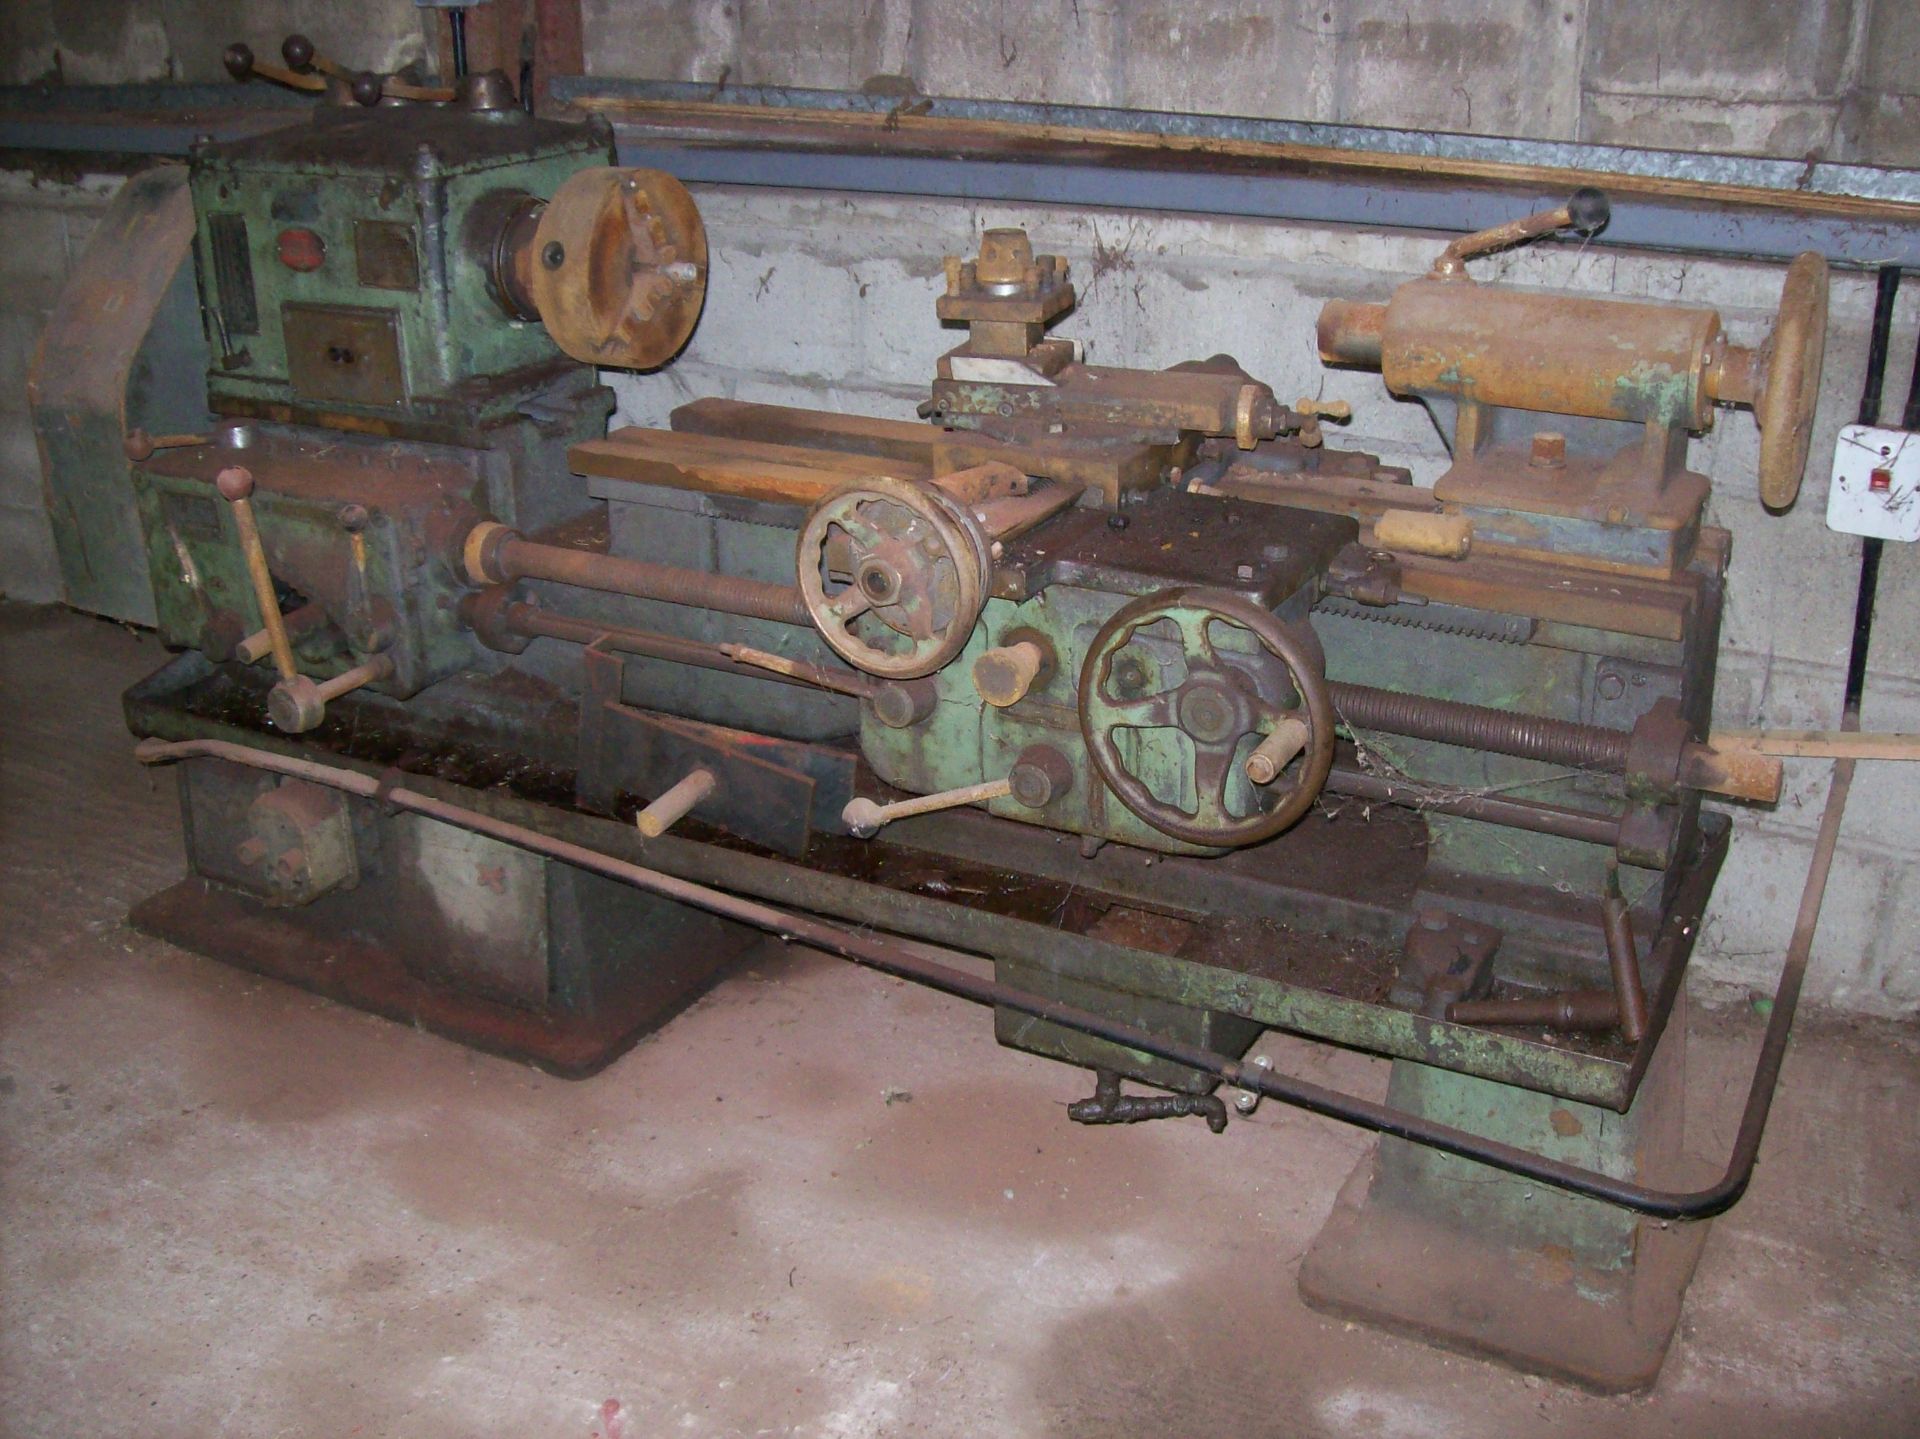 Stanley Large Lathe, been Stored in workshop but not used. Location near Norwich, Norfolk. - Image 2 of 4